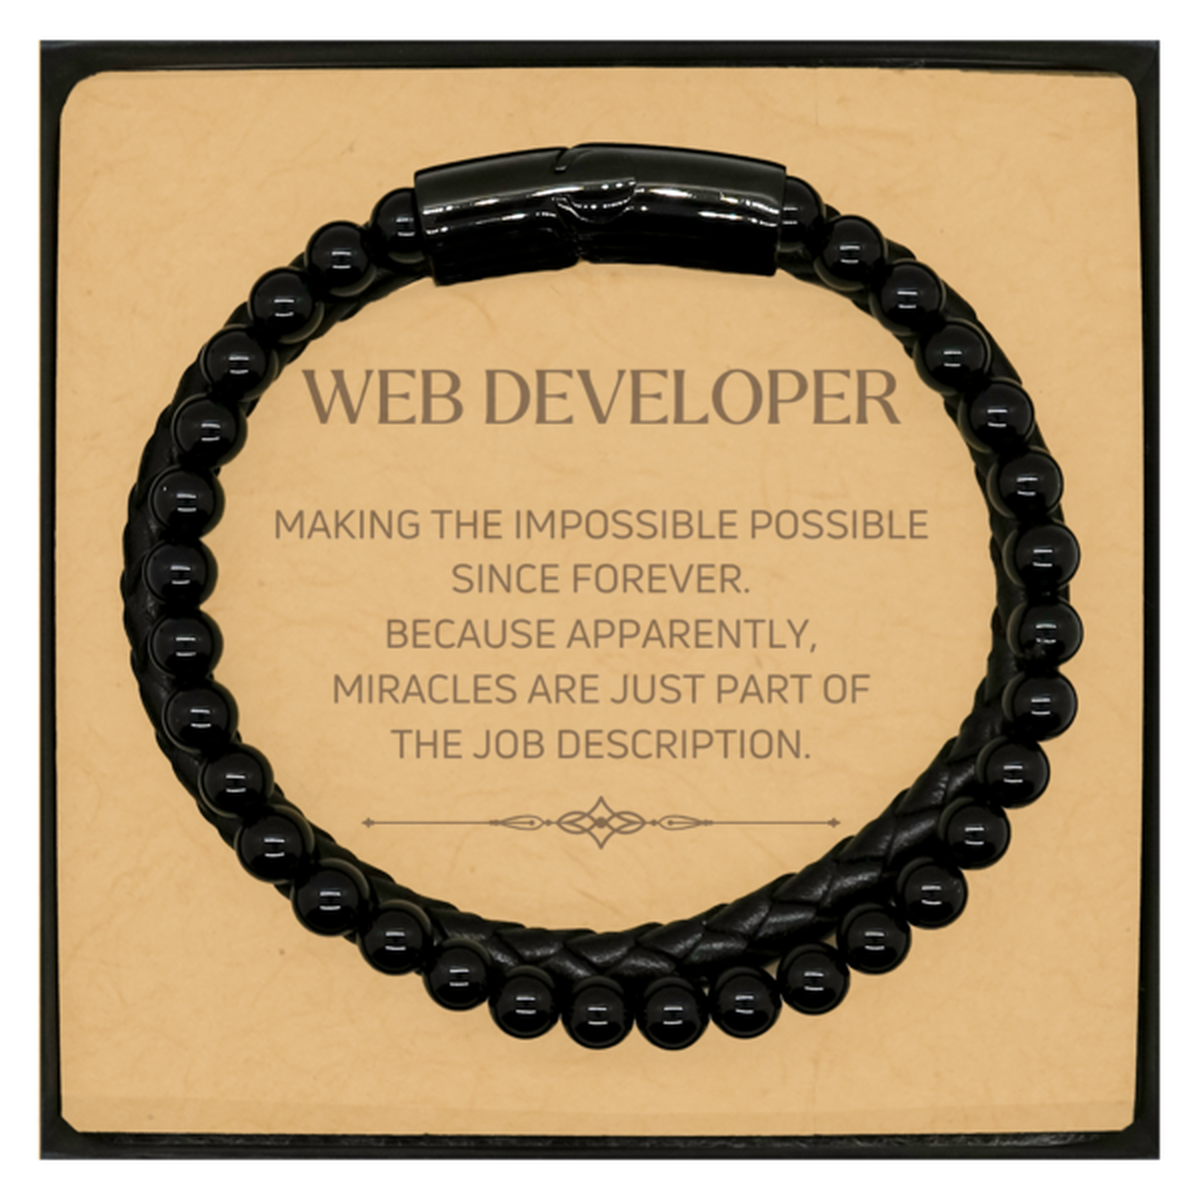 Funny Web Developer Gifts, Miracles are just part of the job description, Inspirational Birthday Christmas Stone Leather Bracelets For Web Developer, Men, Women, Coworkers, Friends, Boss